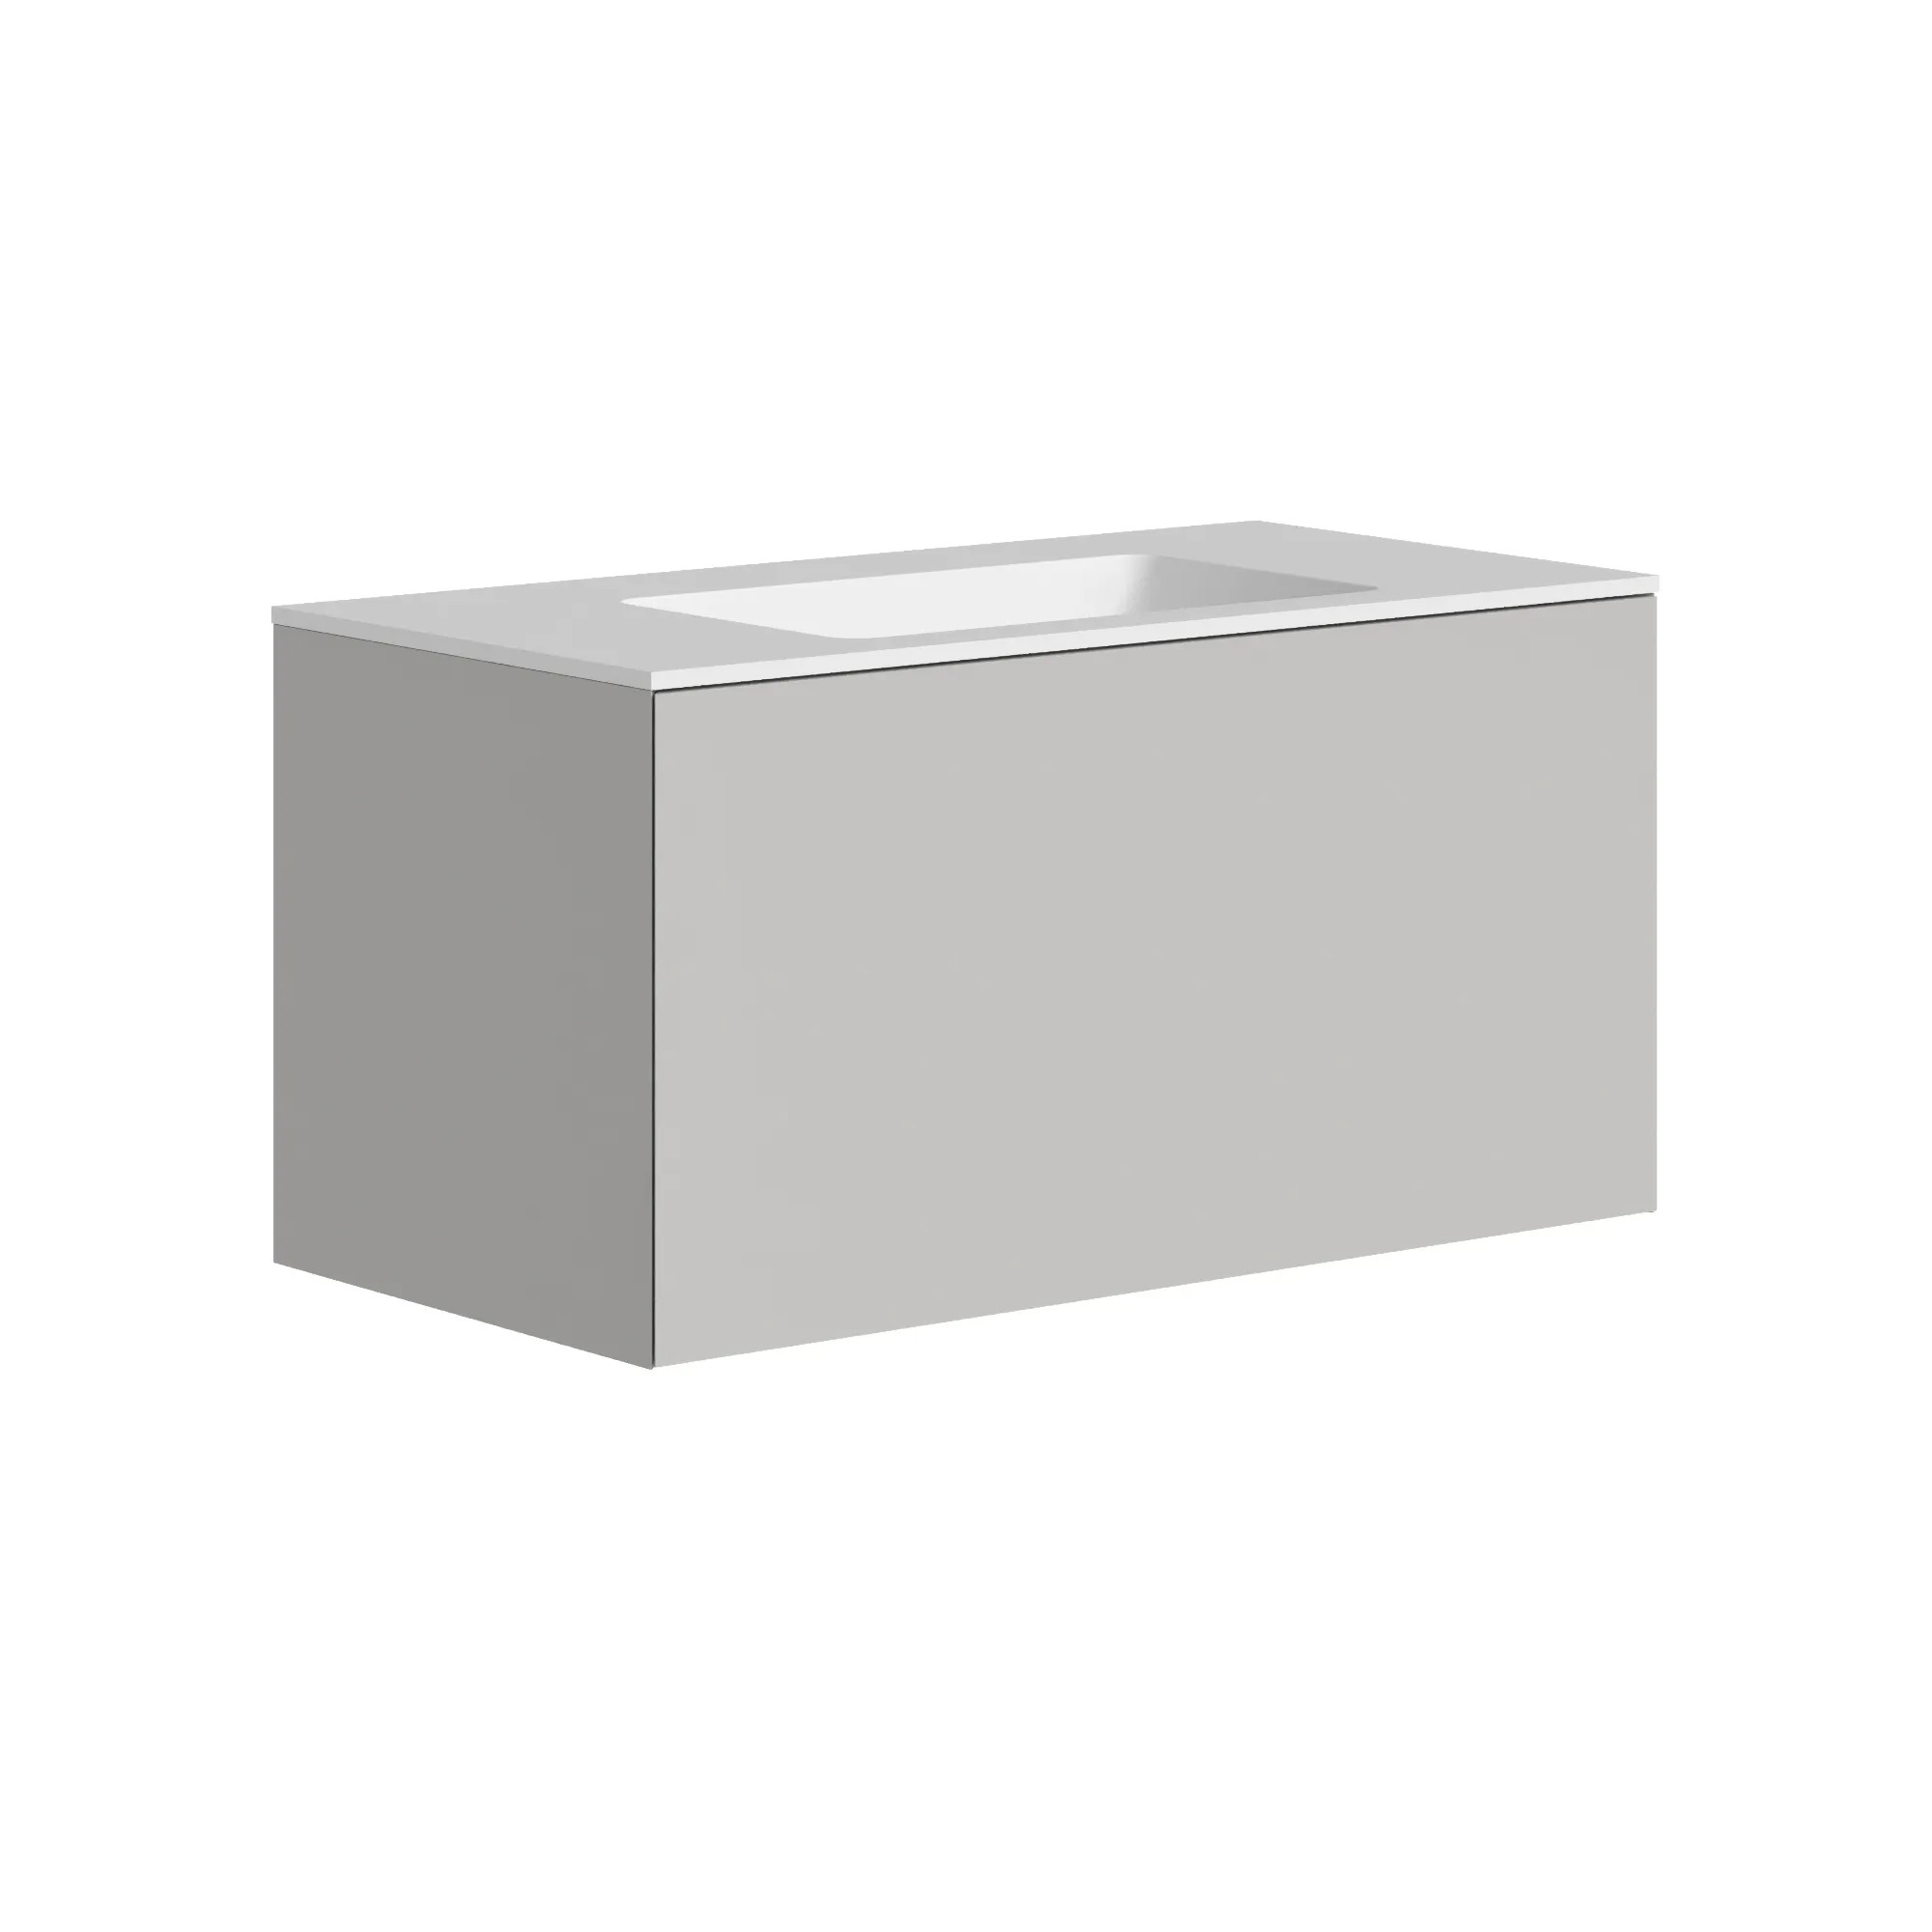 The Ellery Washbasin Push Open Unit 900x450mm with Integrated Basin